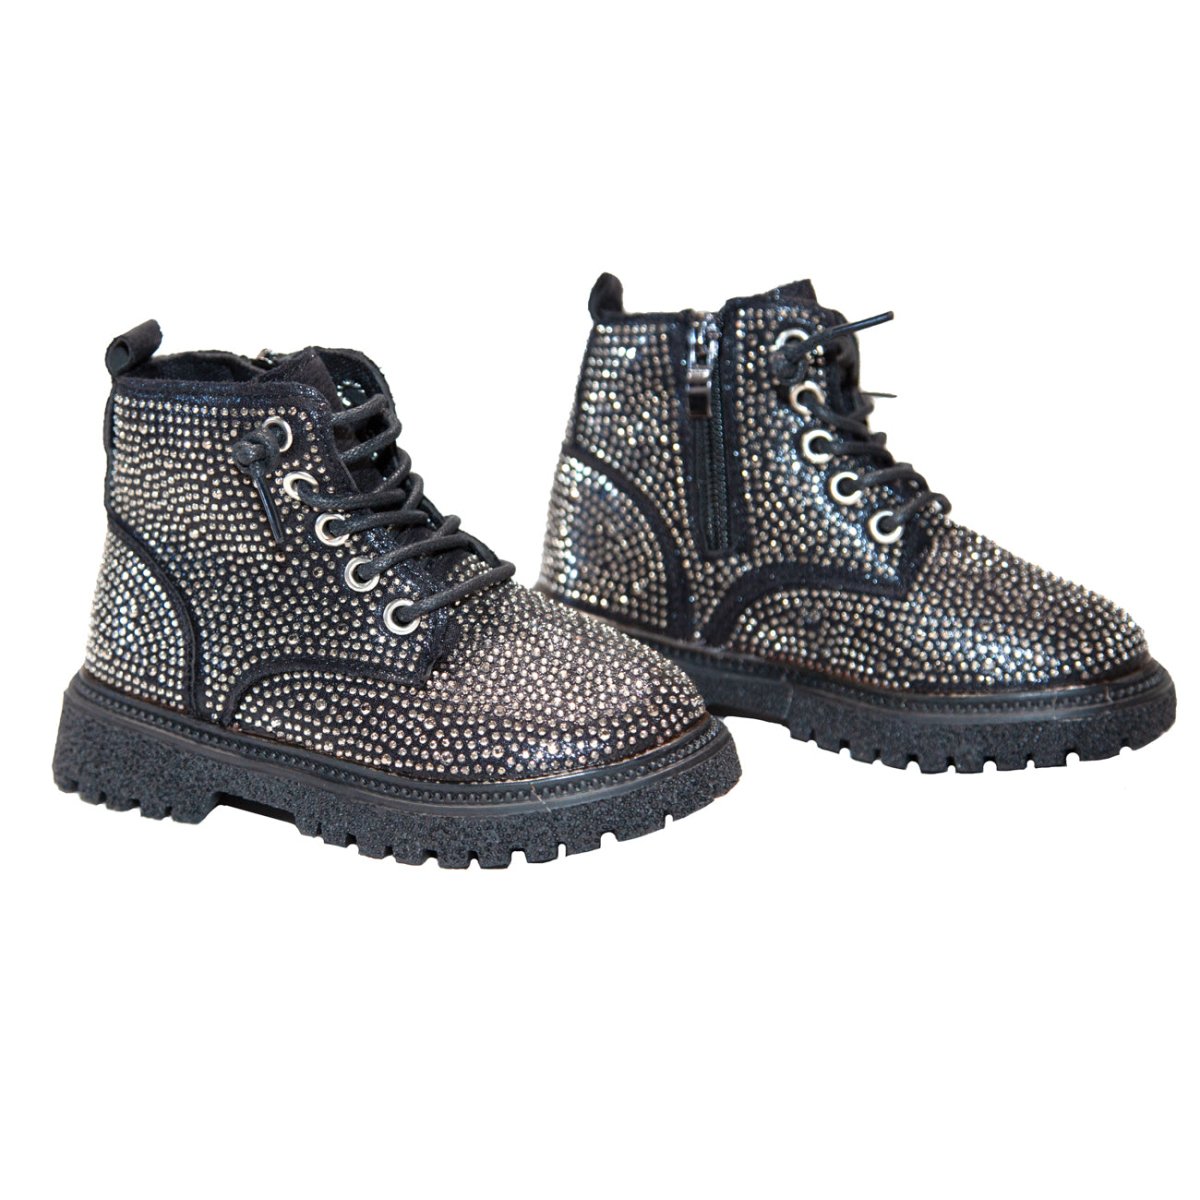 STUDDED LACE UP COMBAT BOOTS - BOOTS